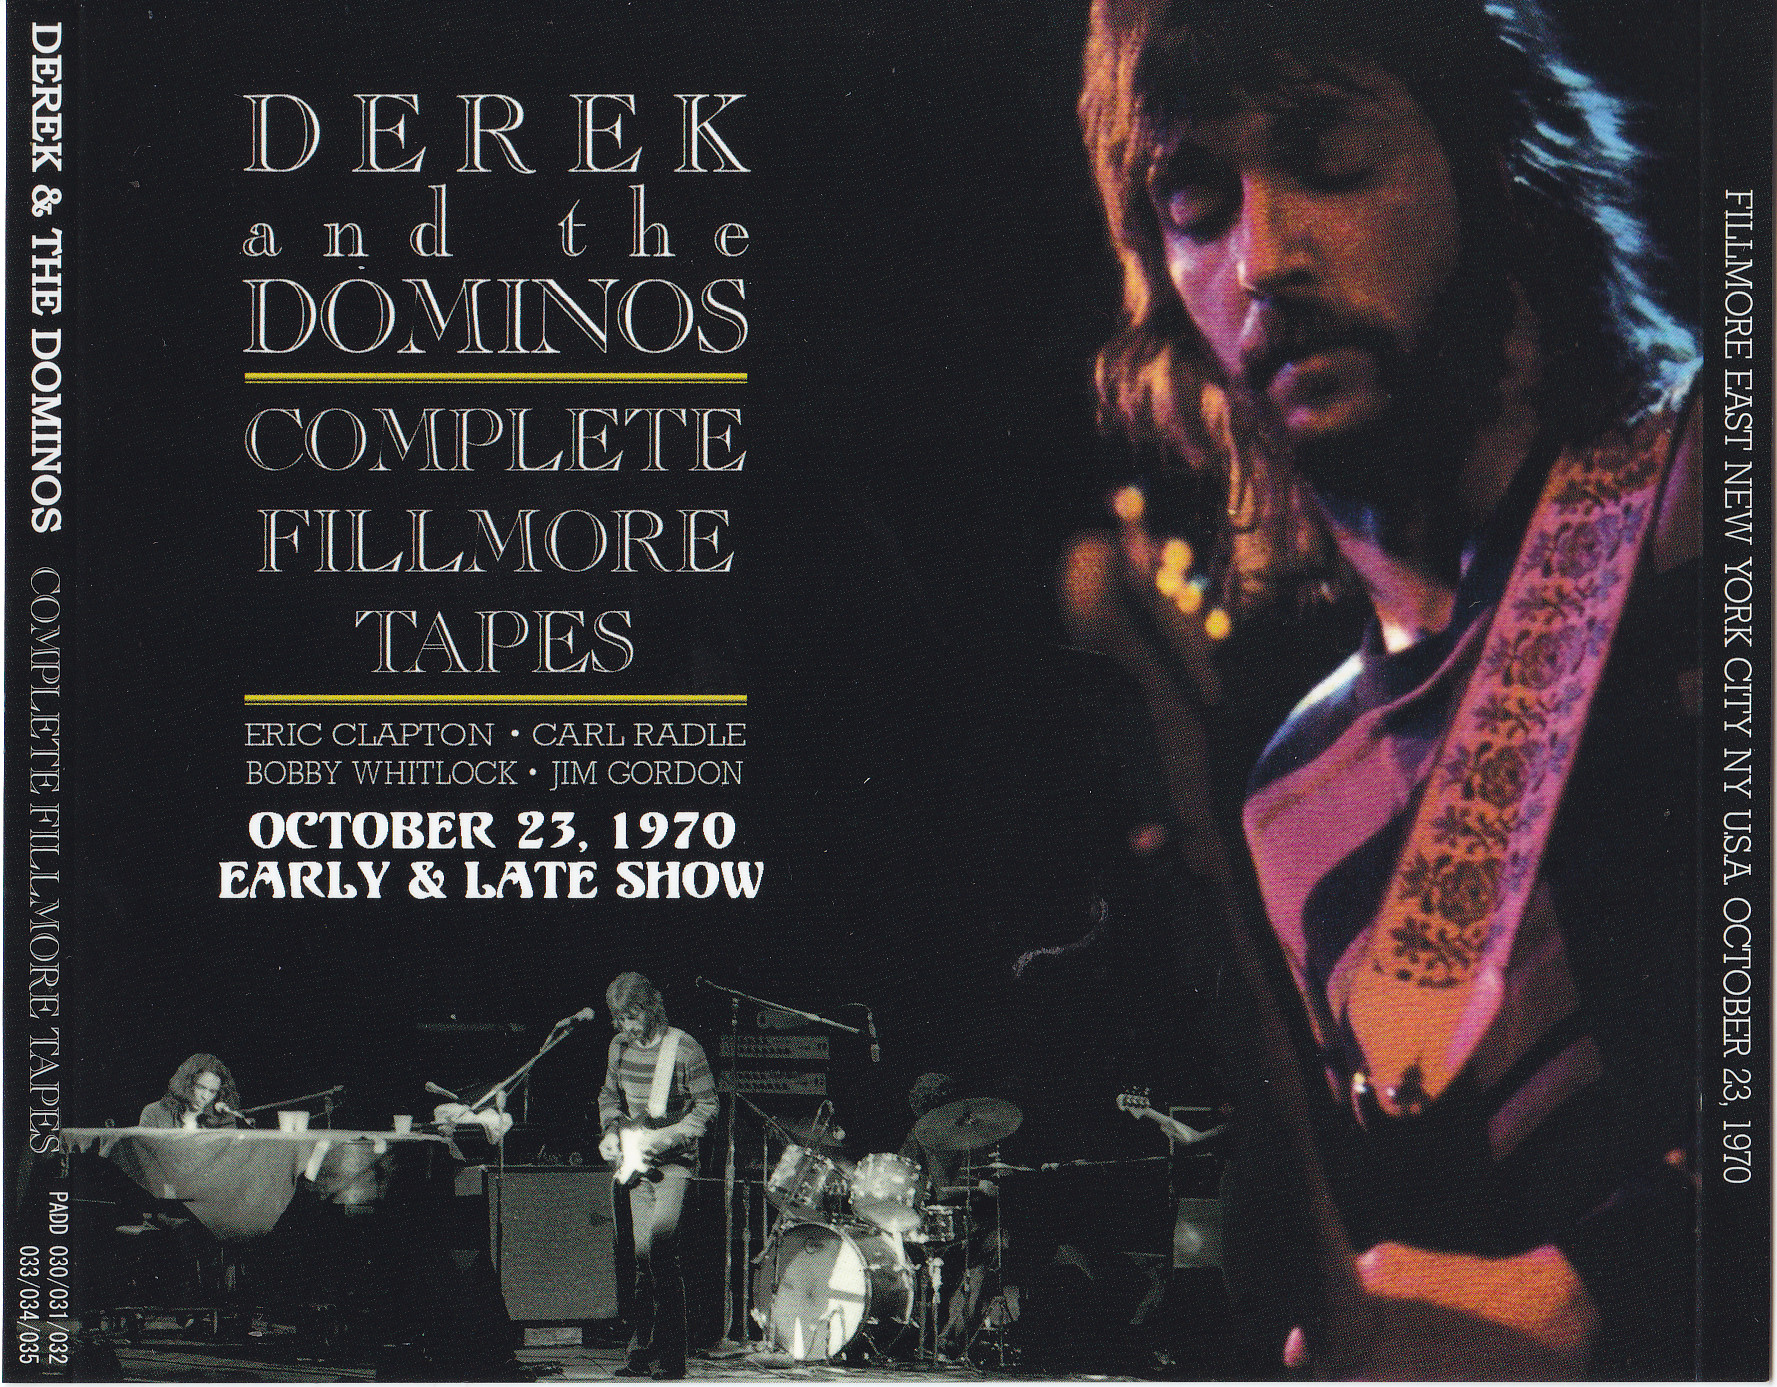 Derek & The Dominos / Complete Fillmore Tapes – New / 10 CD Wx 